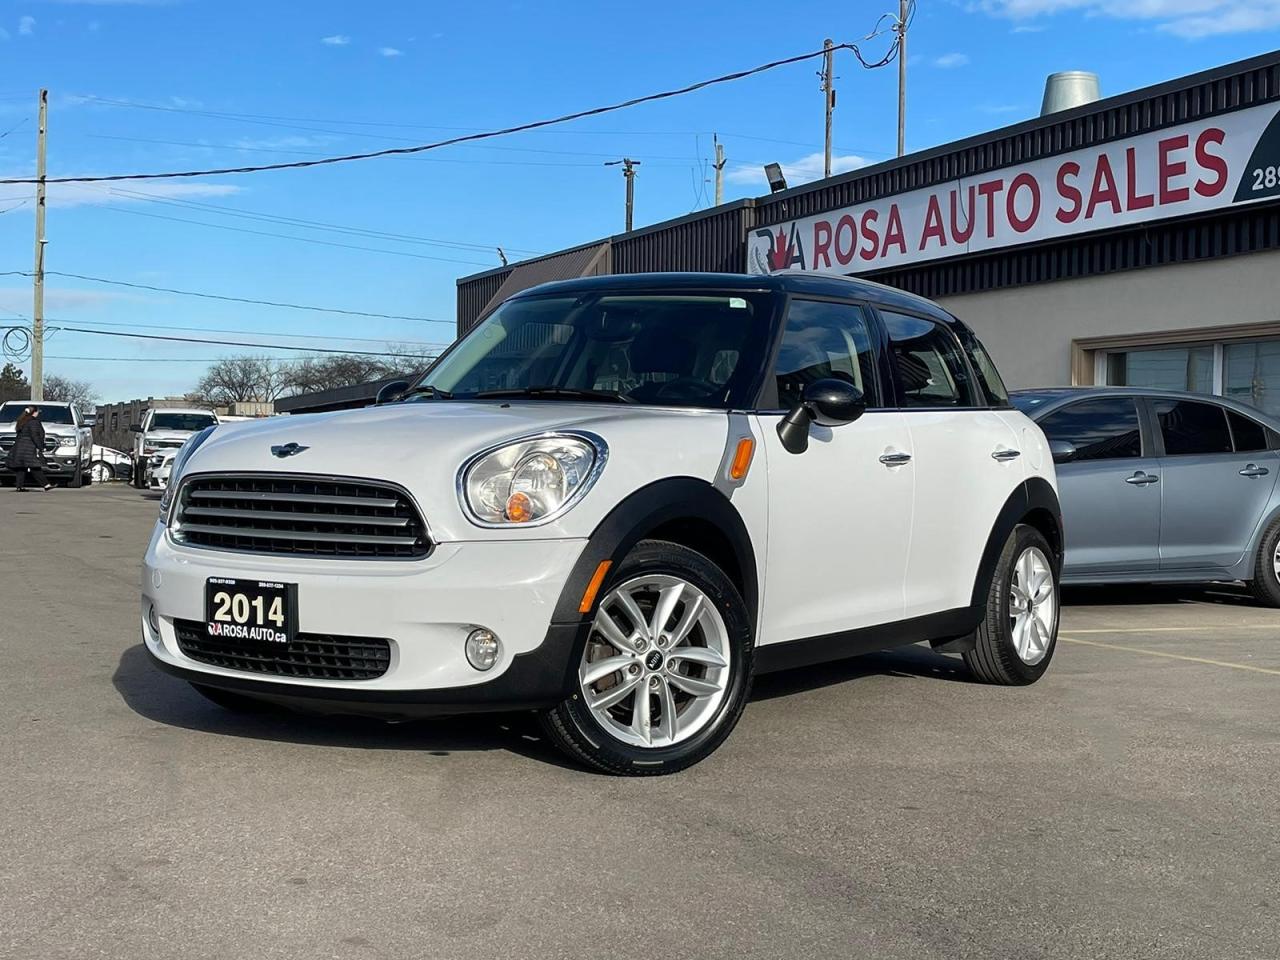 2014 MINI Cooper Countryman AUTO 5DR HATCH LOW KM PANORAMIC ROOF B-TOOTH - Photo #1